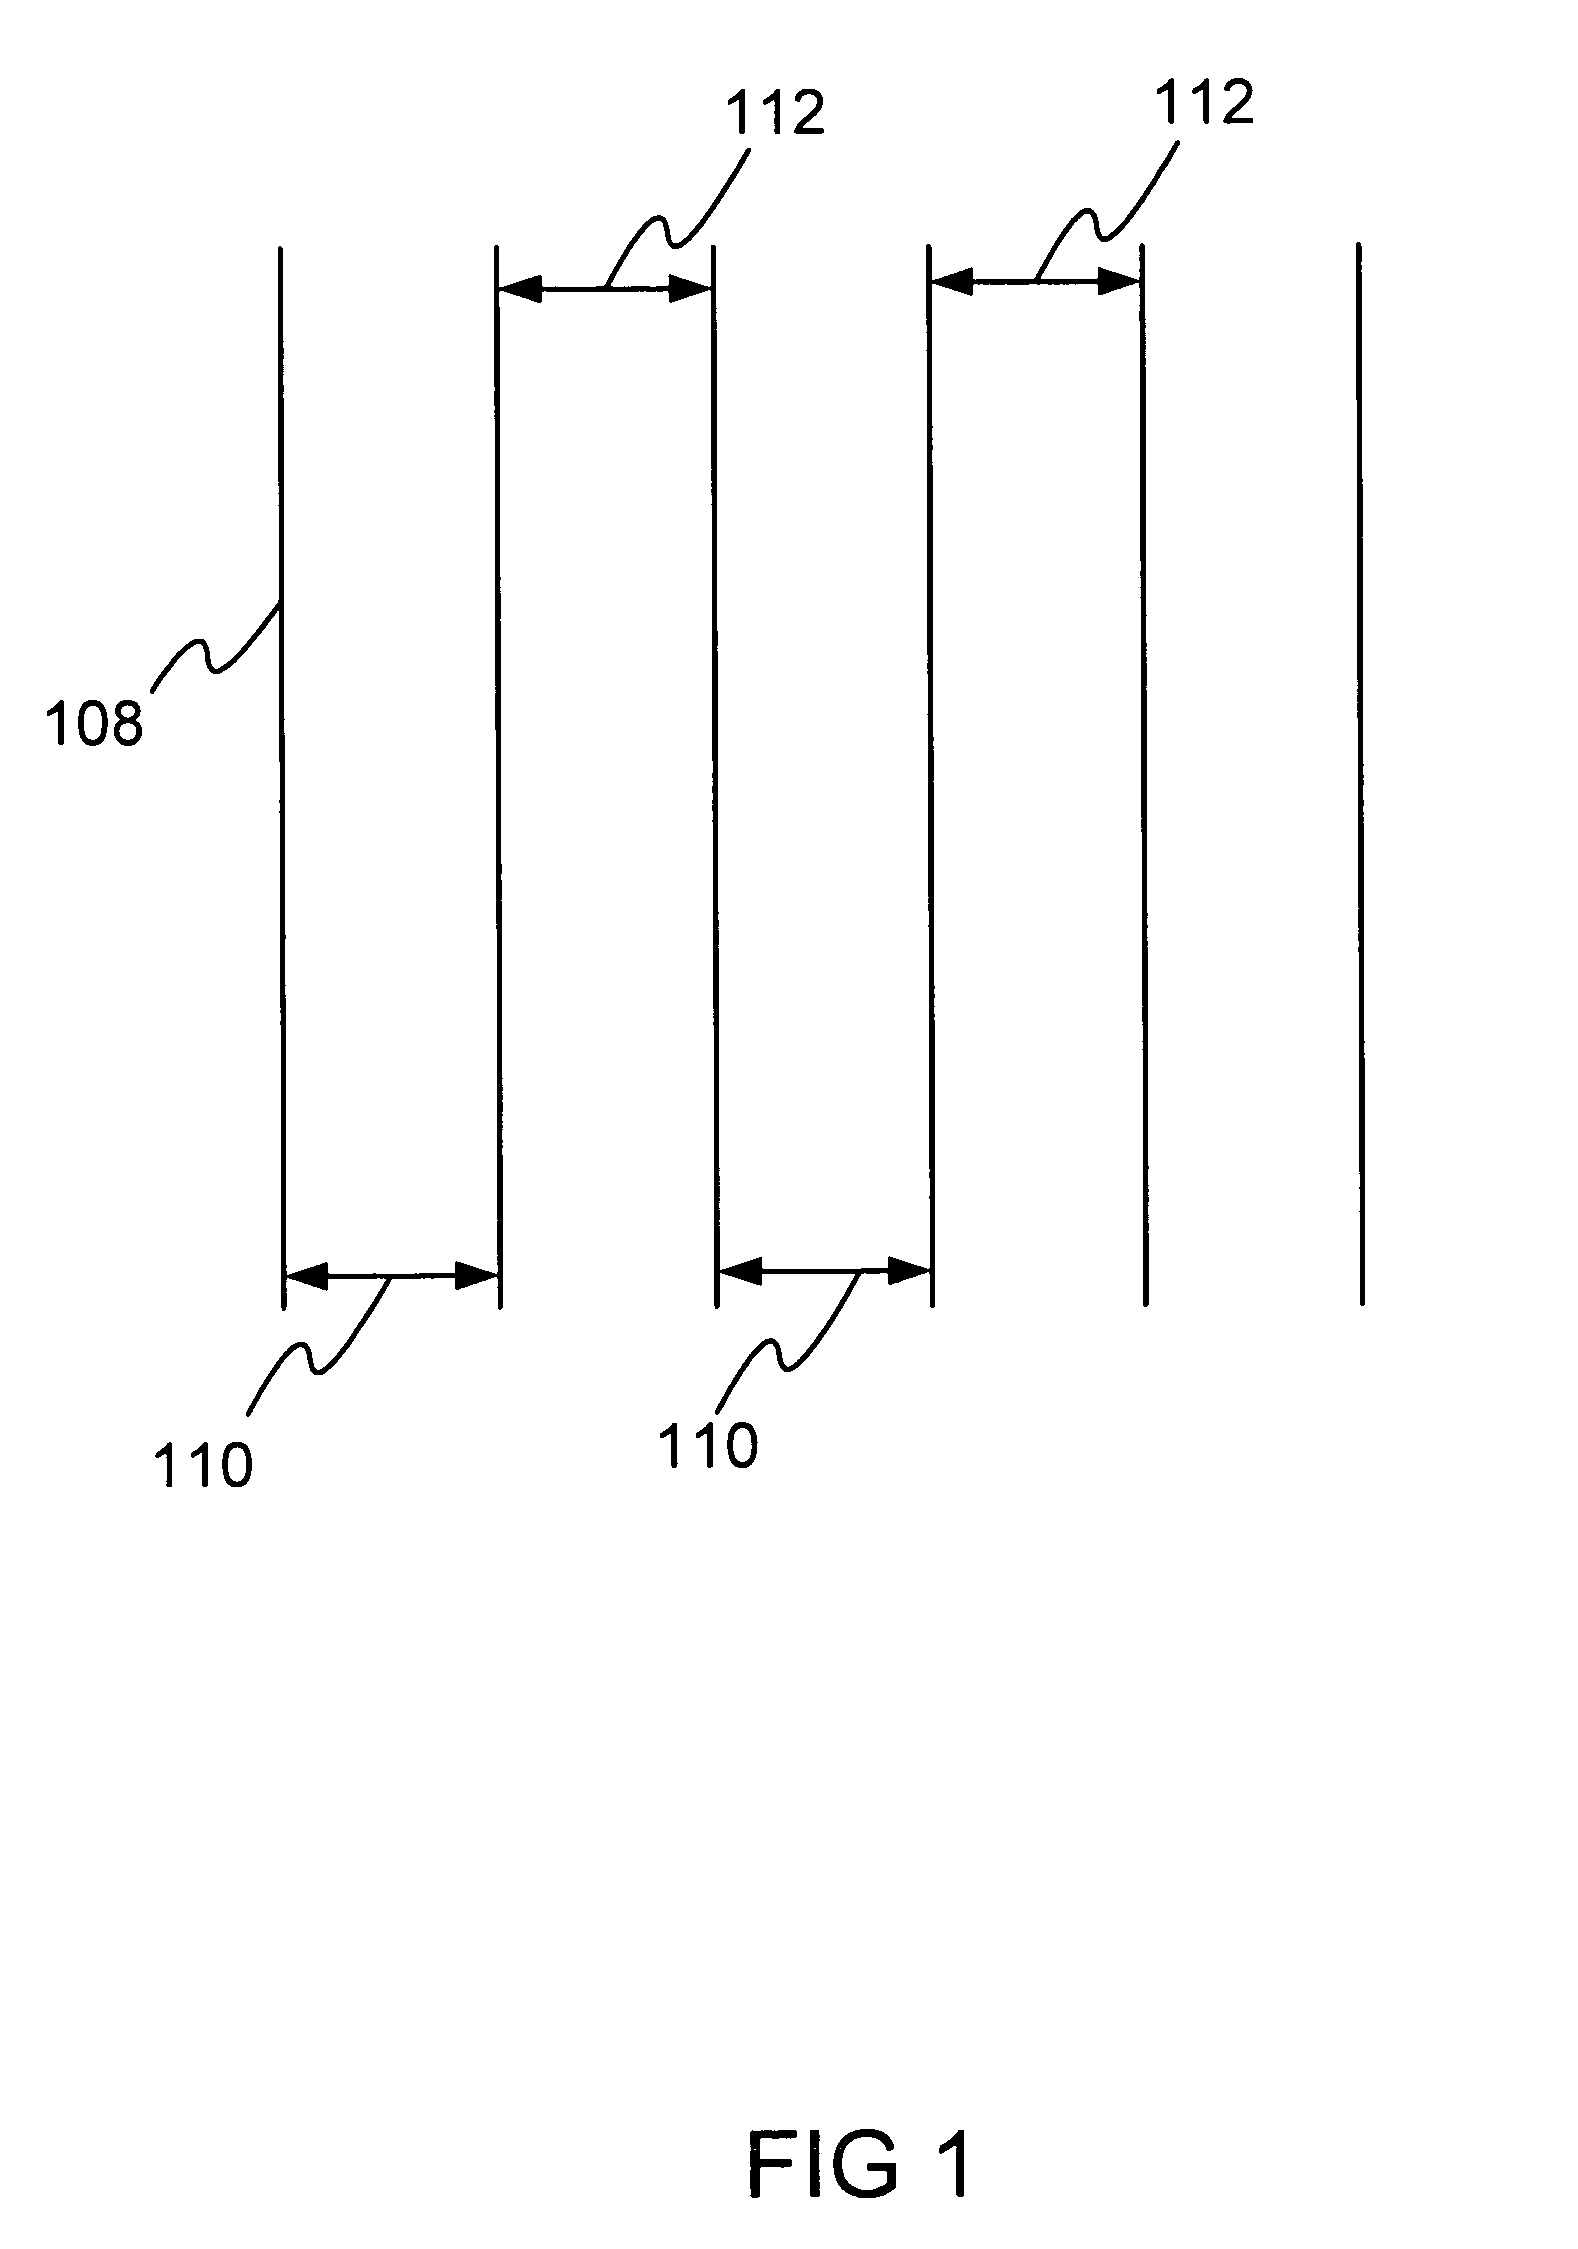 Timesharing of a display screen